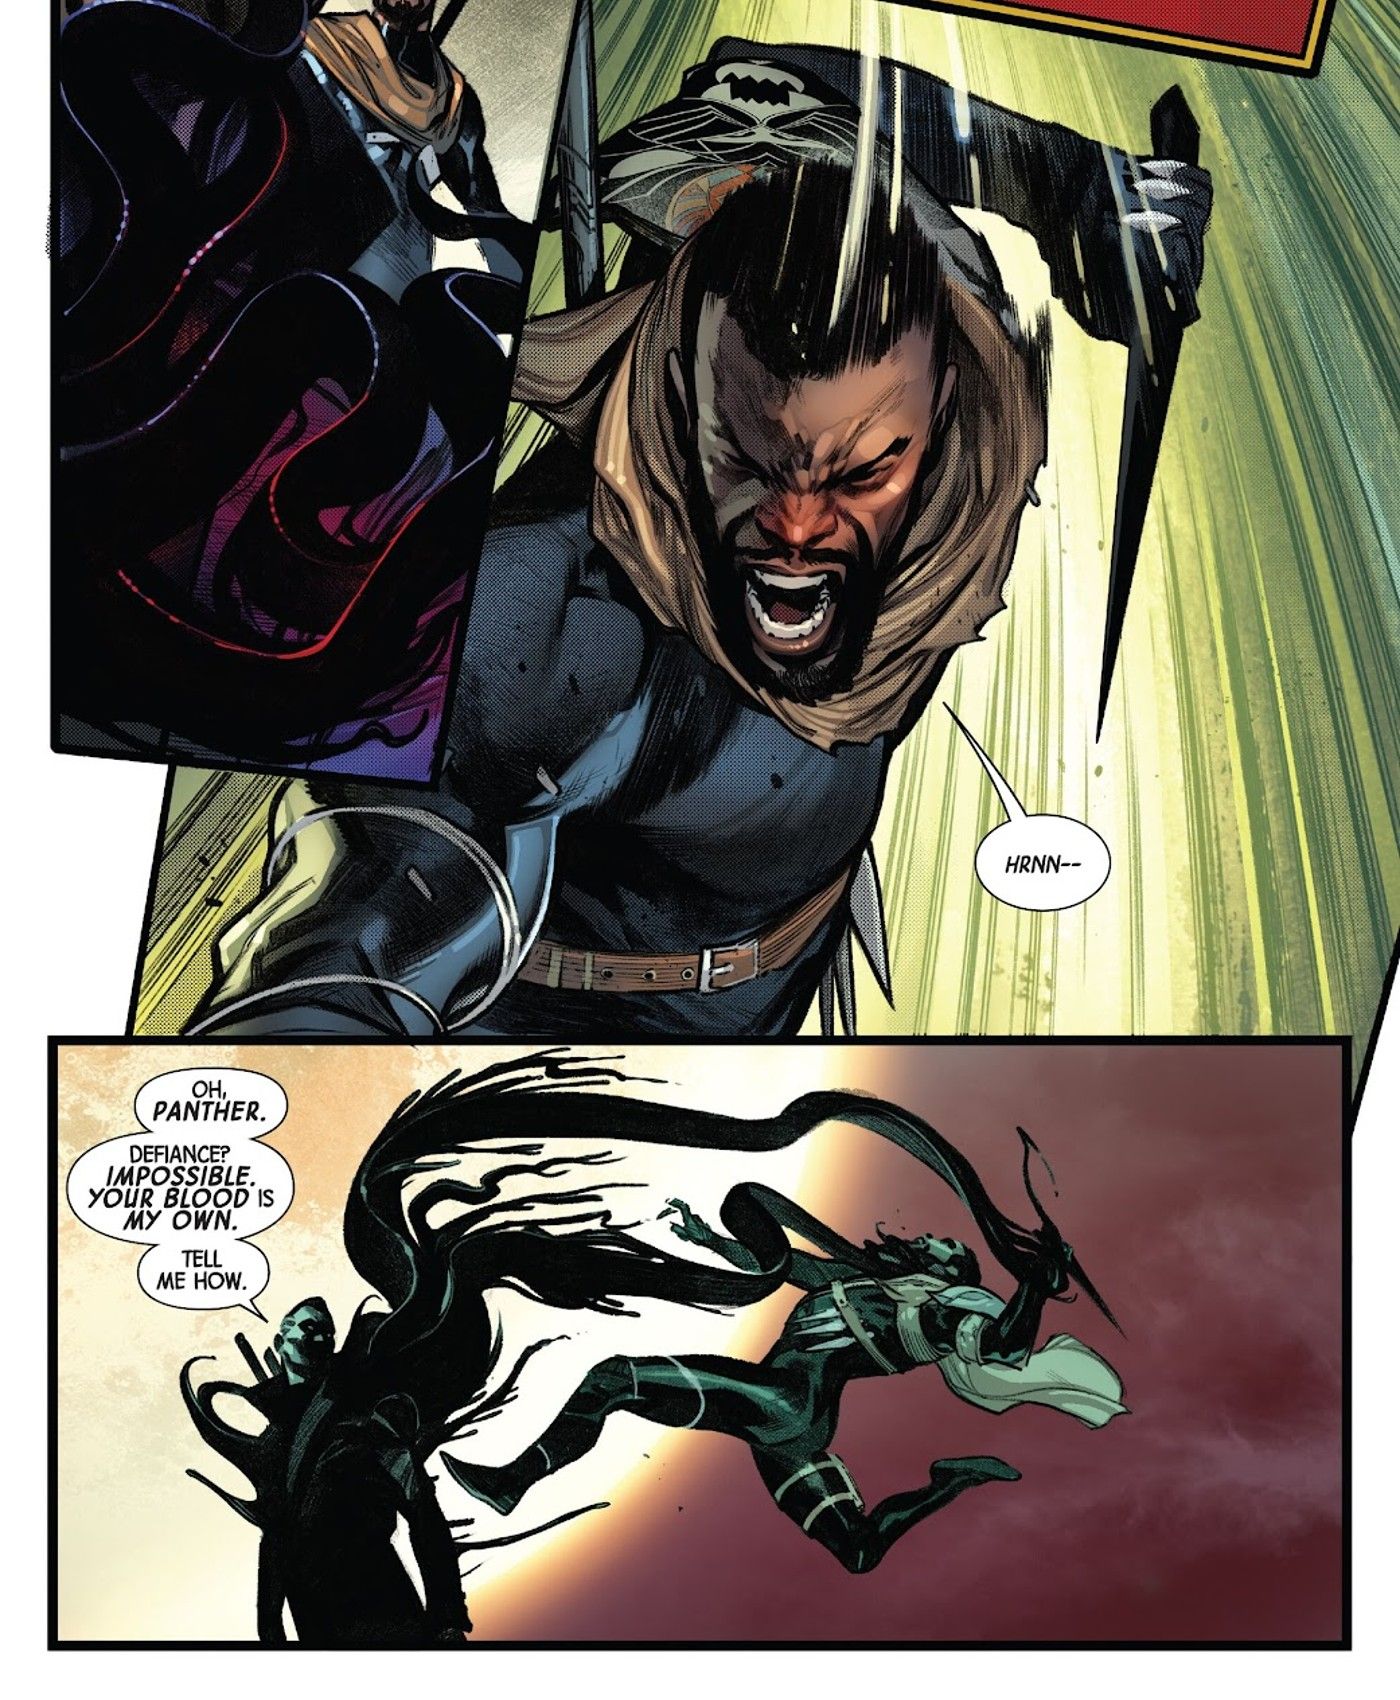 Blood Hunt #4, Black Panther rebels and tries to attack his vampire master Blade.